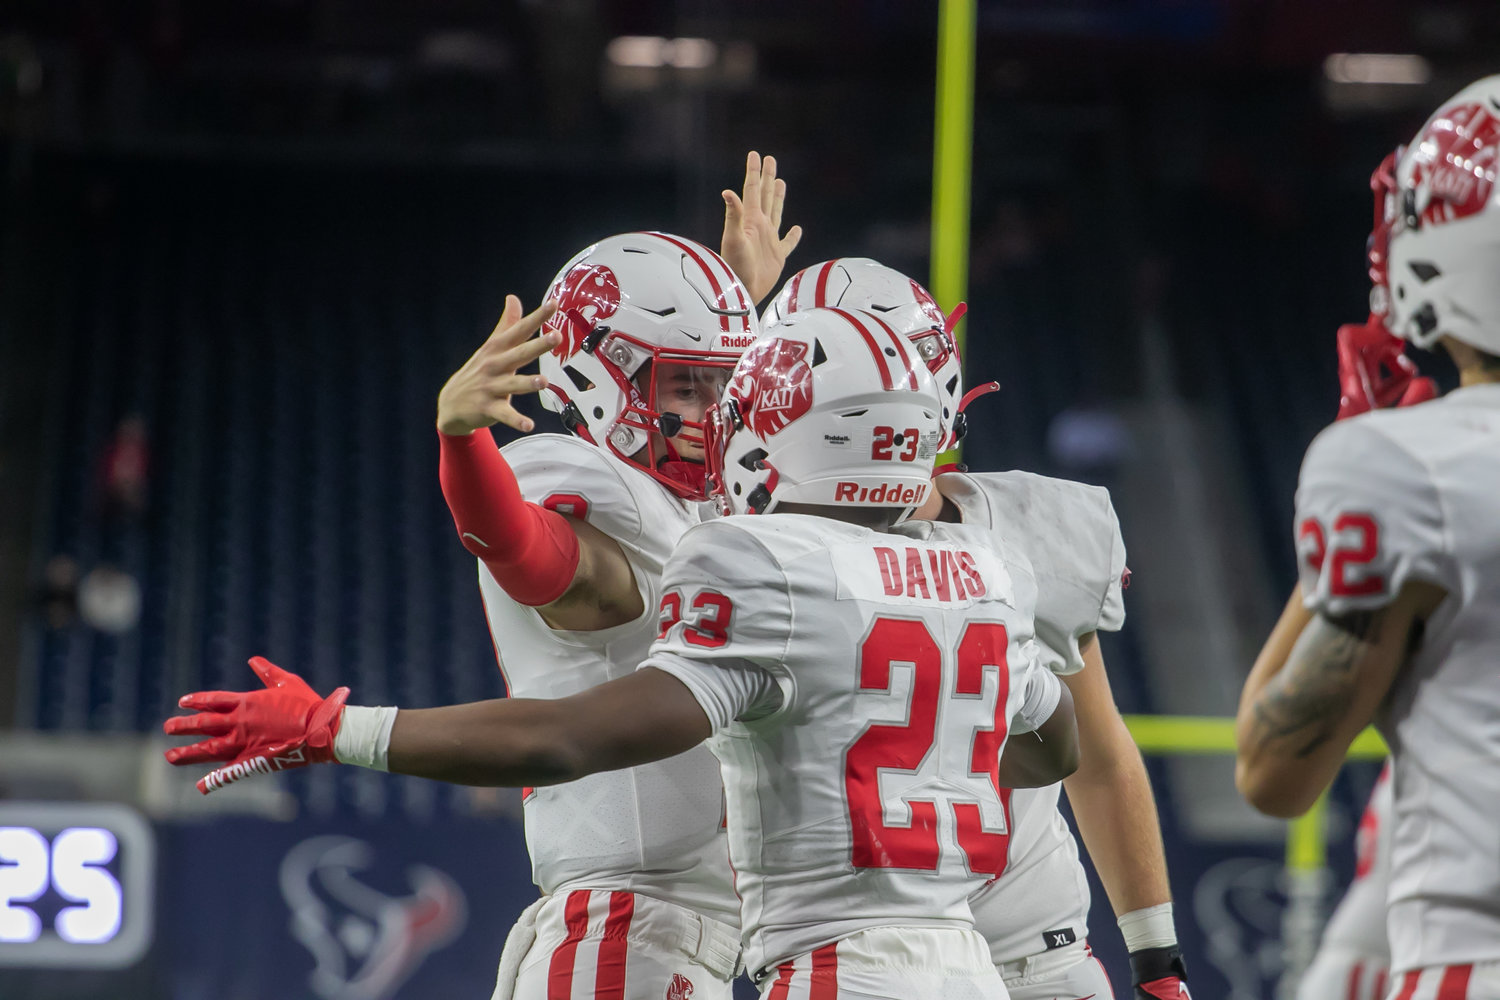 Seth Davis celebrates with teammates during Friday's Class 6A-Divison II Region III Final between Katy and C.E. King at NRG Stadium.